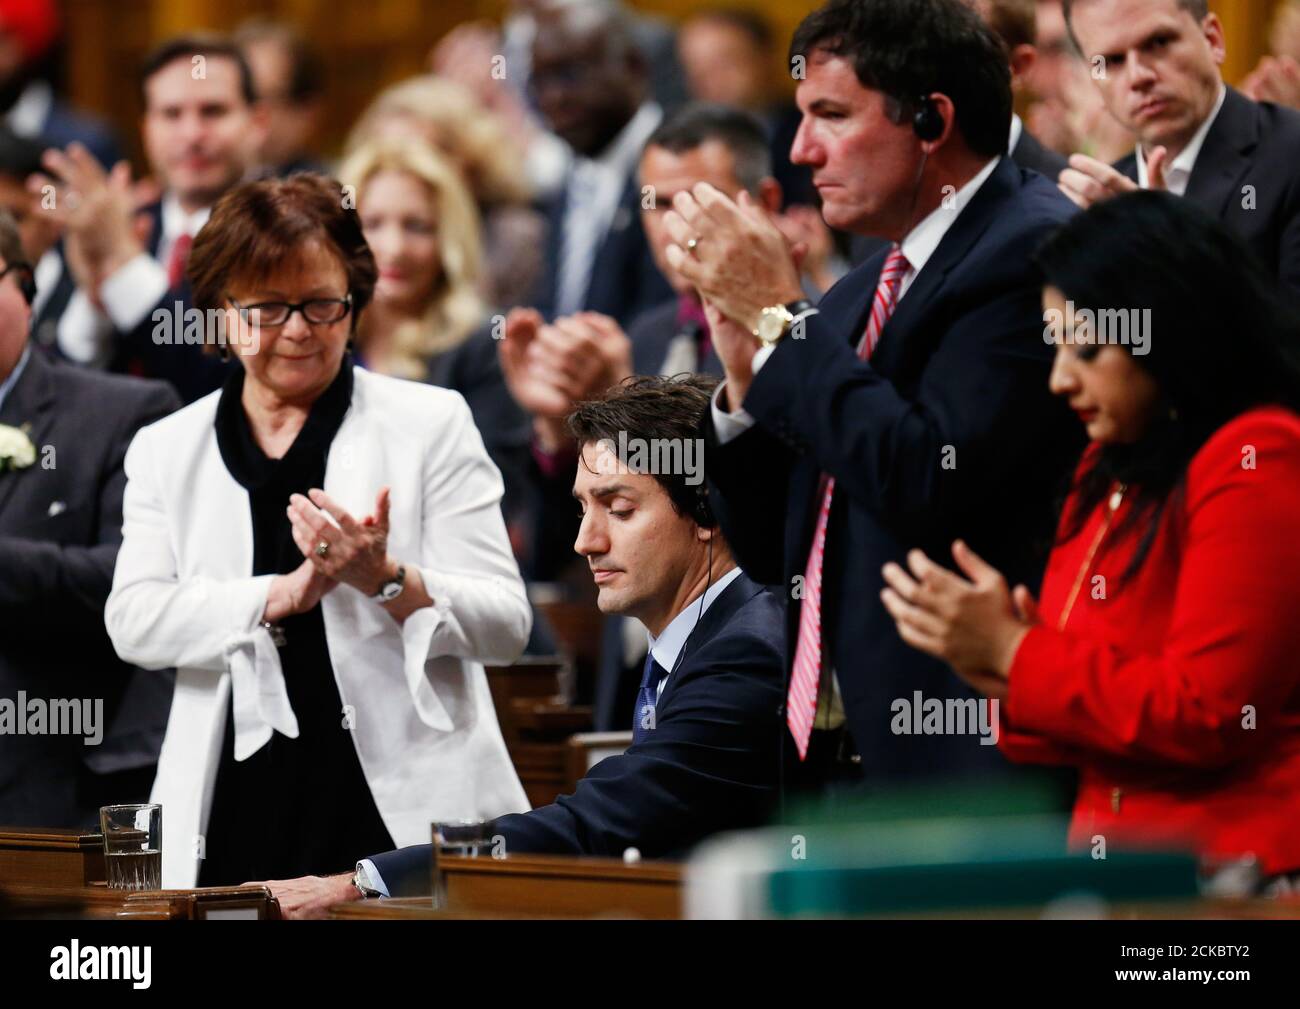 Liberal MPs applaud after Canadian Prime Minister Justin Trudeau delivered an apology in the House of Commons in Ottawa, Ontario, Canada after a physical alteration the previous day. REUTERS/Chris Wattie Stock Photo